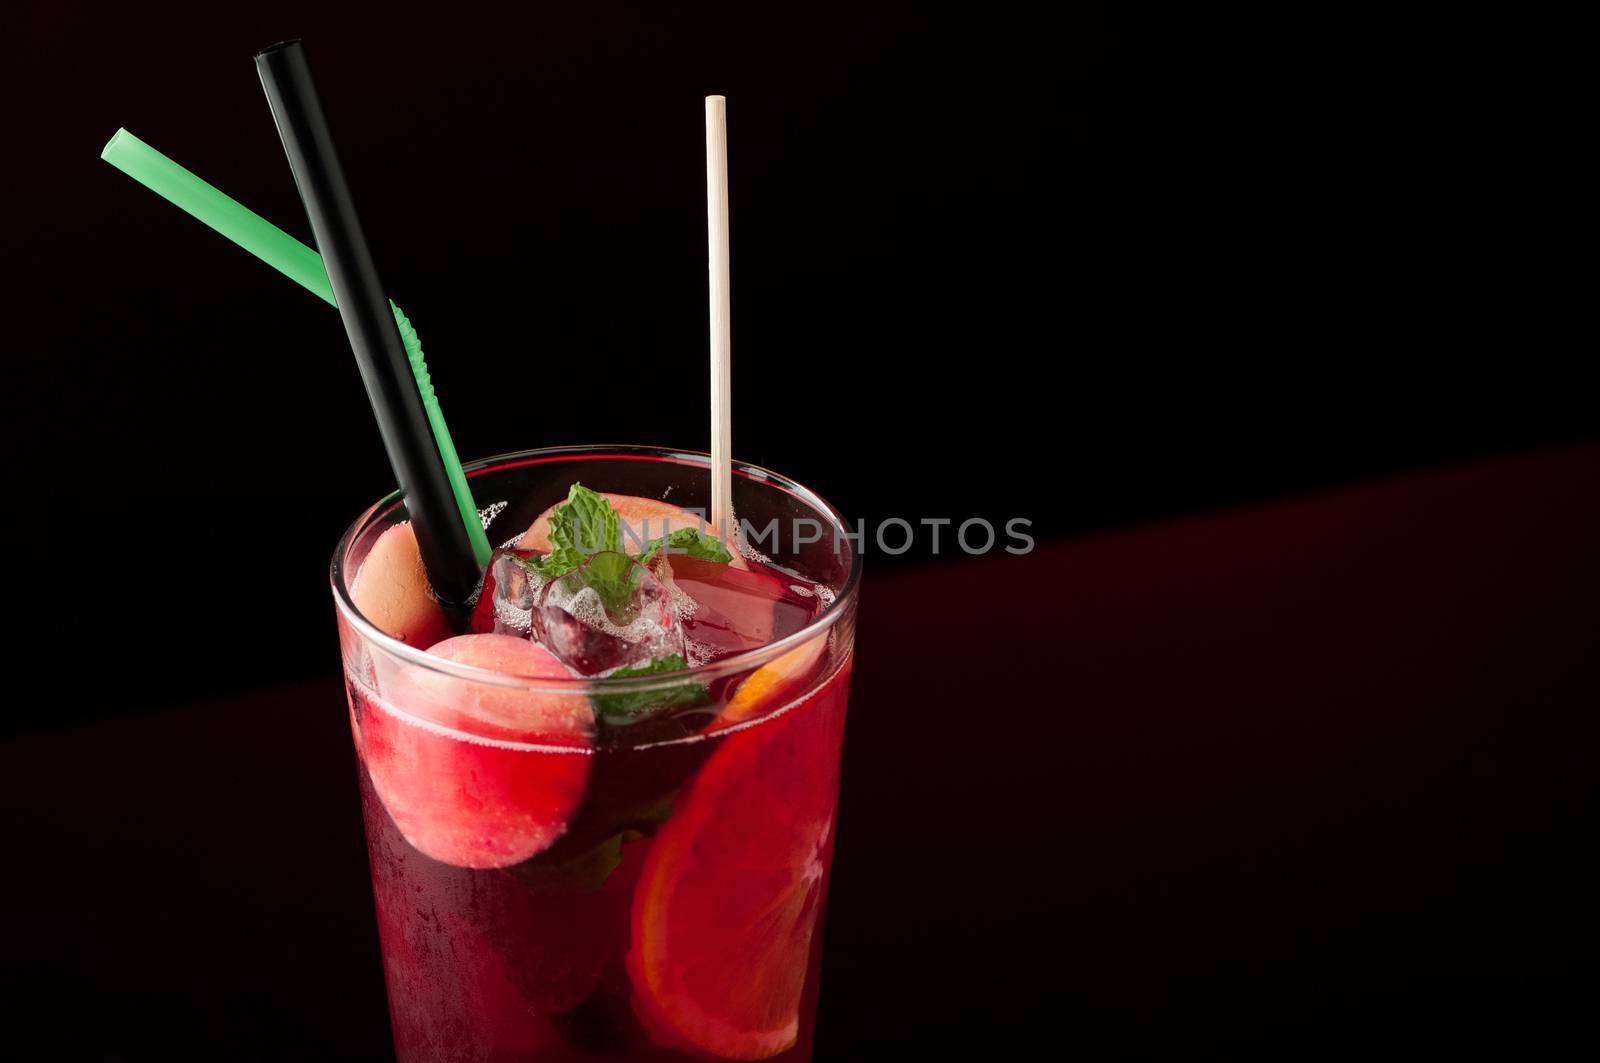 ice tea in a glass on a dark background